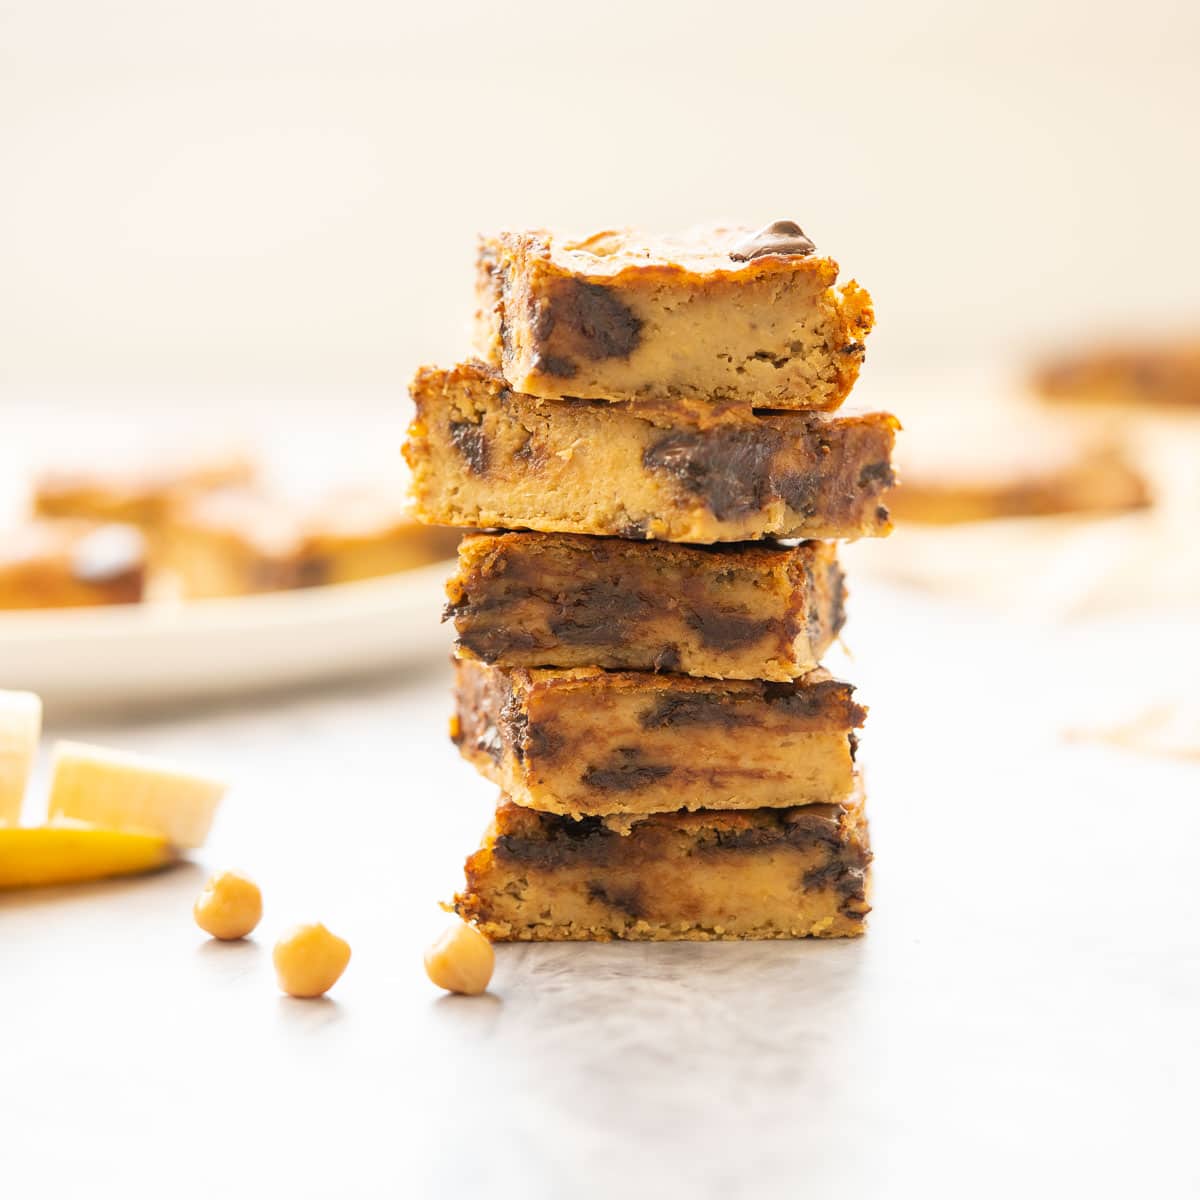 stacked pieces of sliced chickpea blondie sitting on the bench with a sliced banana and chickpeas scatted next to it